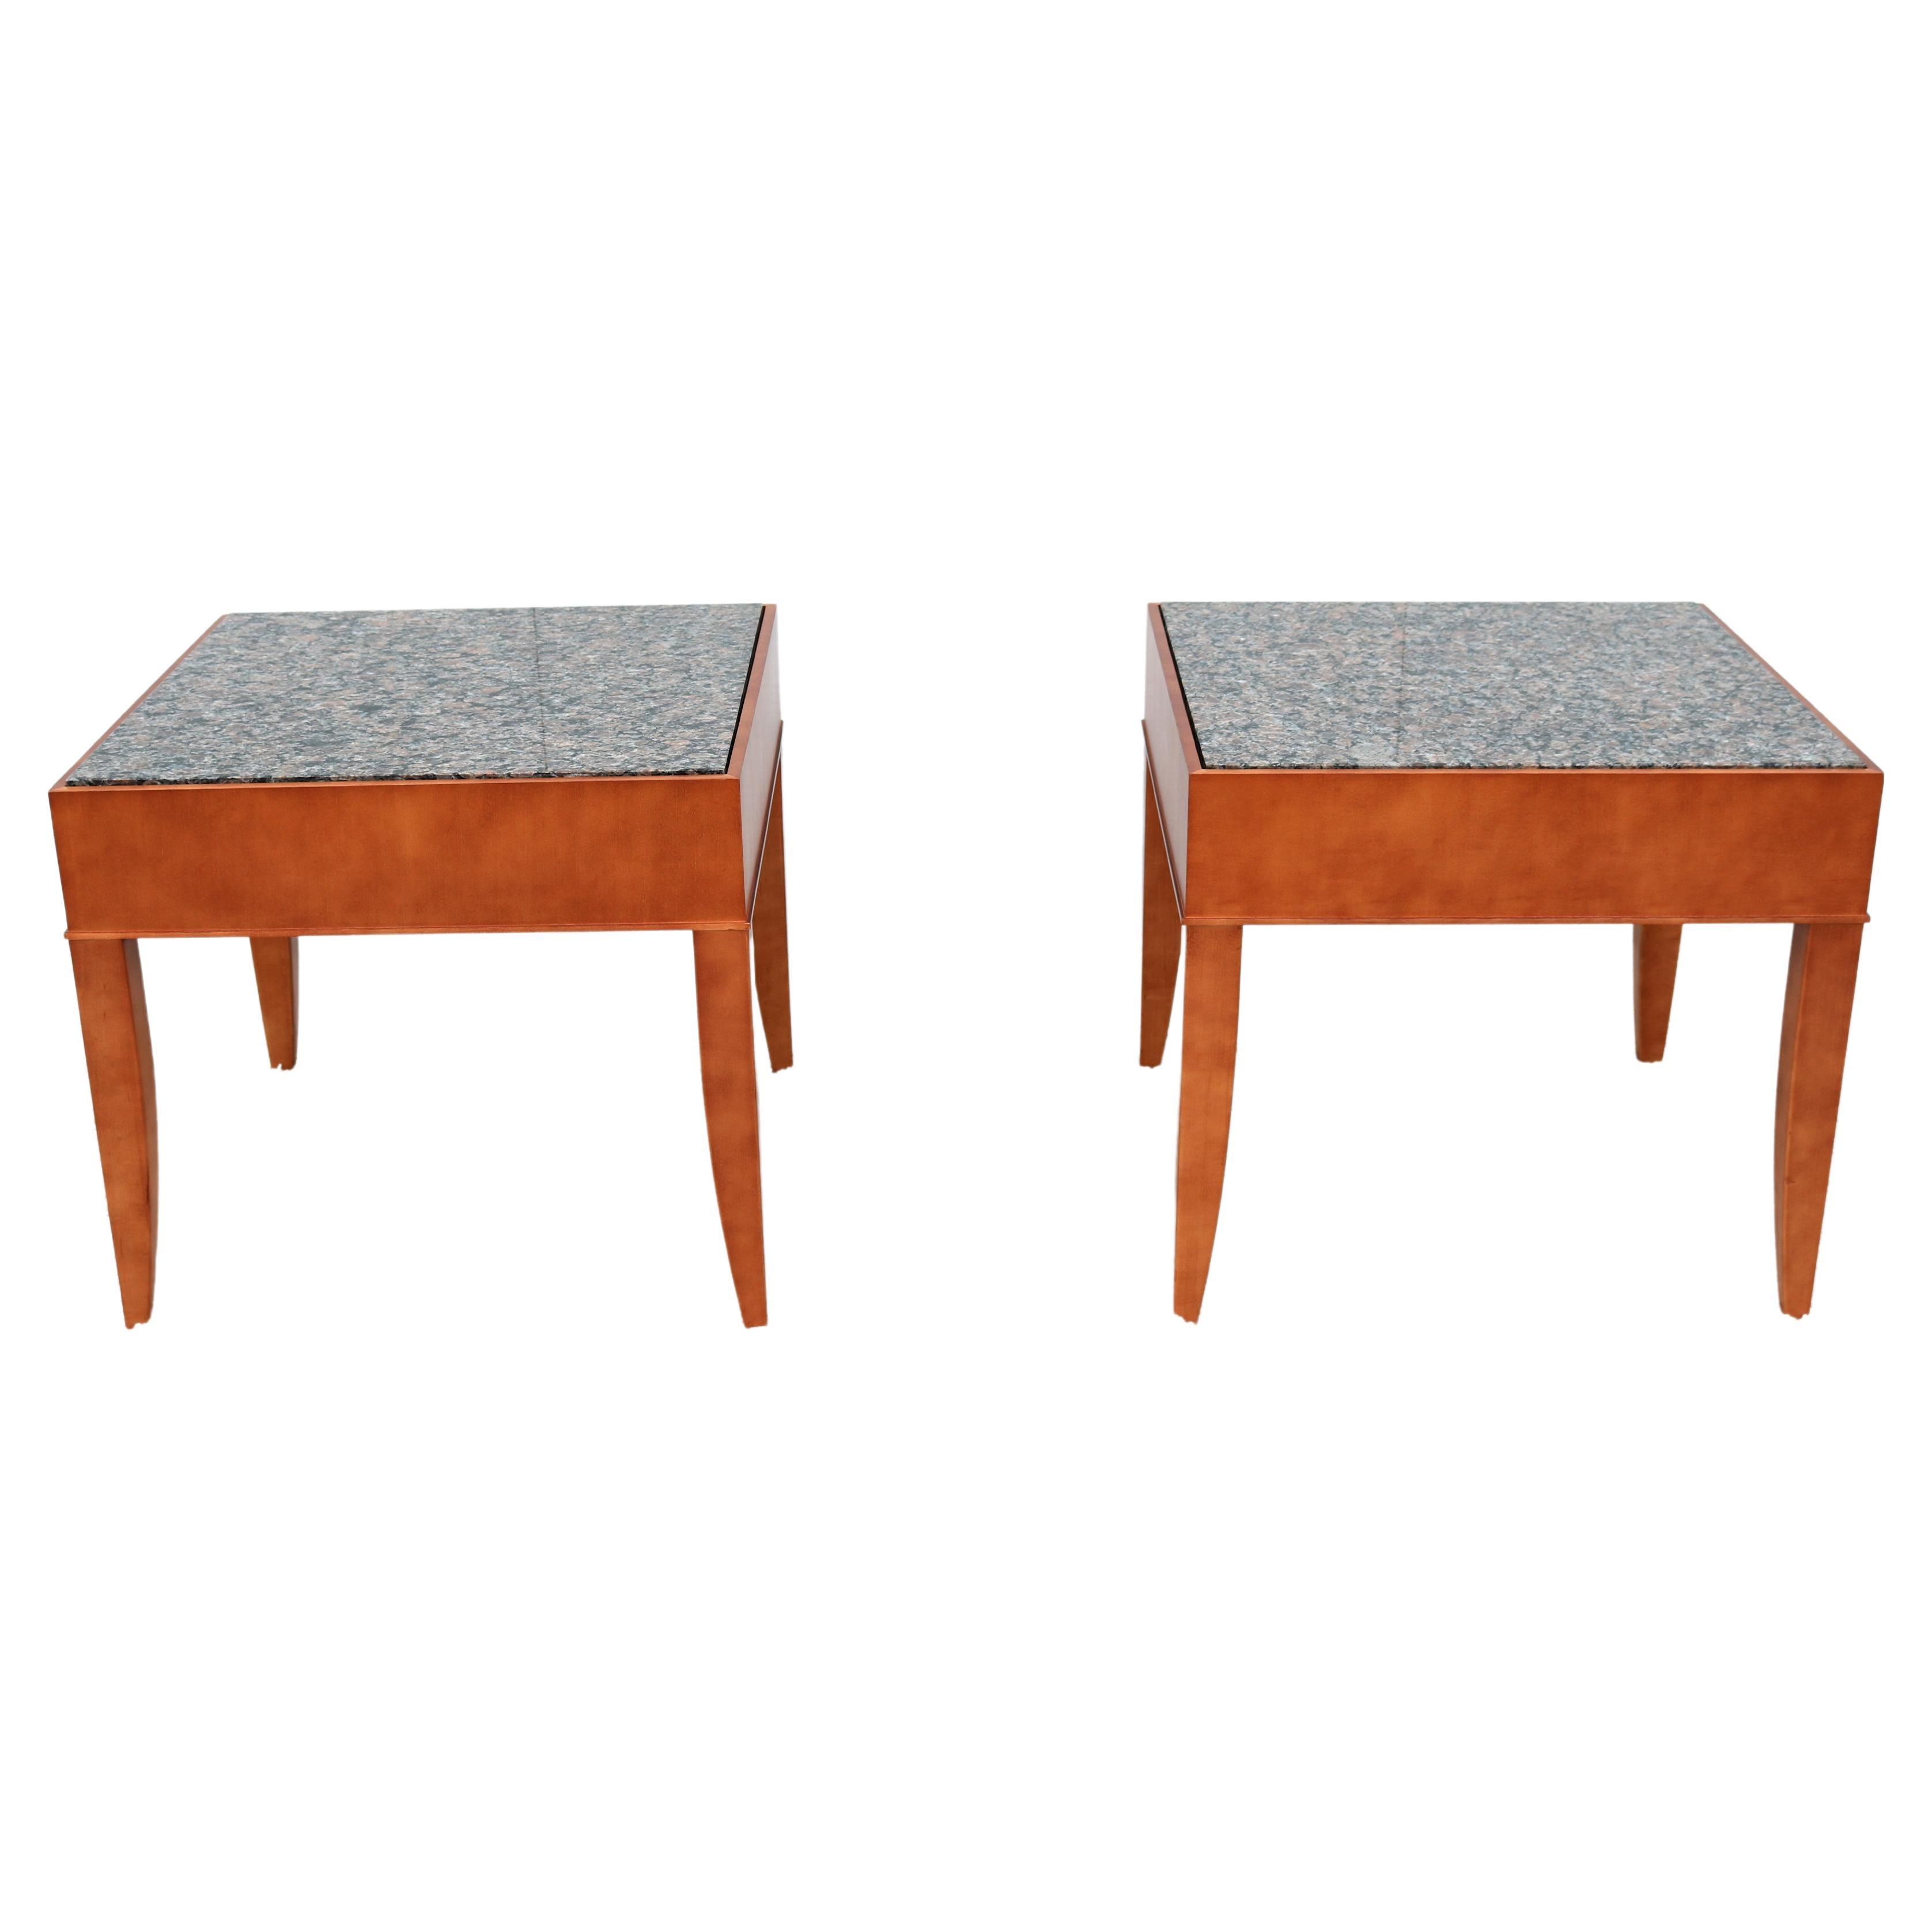 Contemporary George Simons for Brayton Donovan Granite Square Side Tables a Pair For Sale